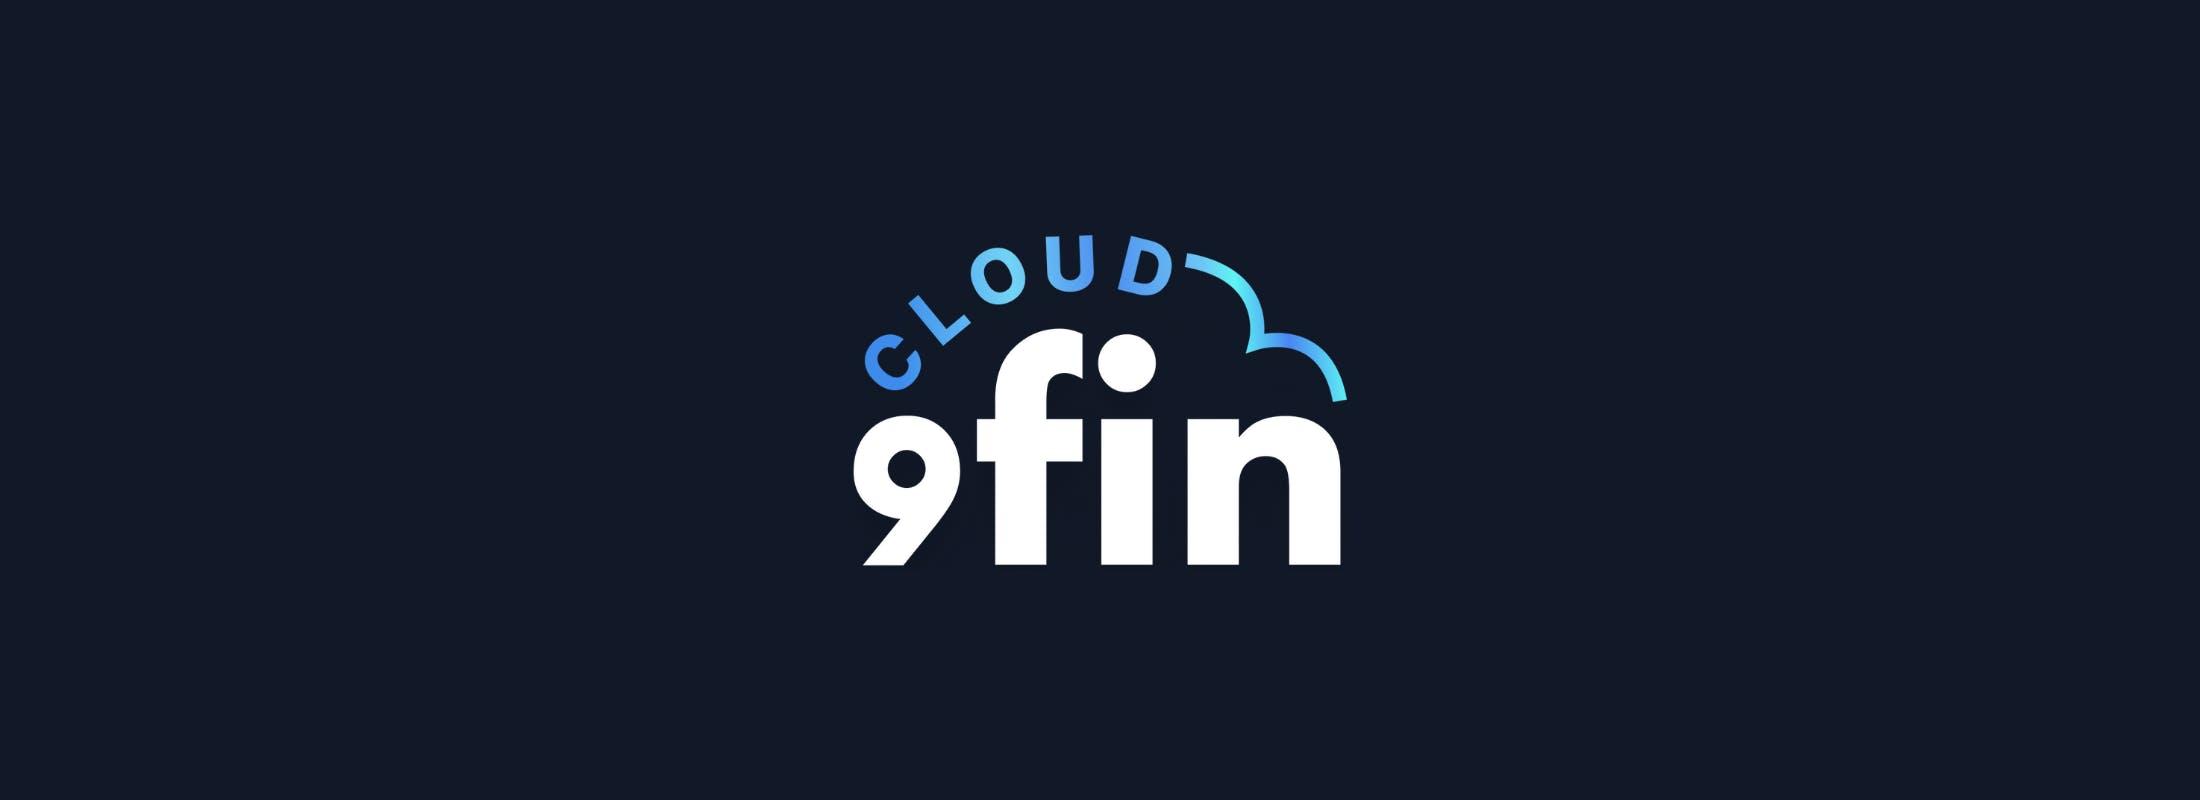 Cloud 9fin — Tailoring to the thesis with David Leland of BC Partners